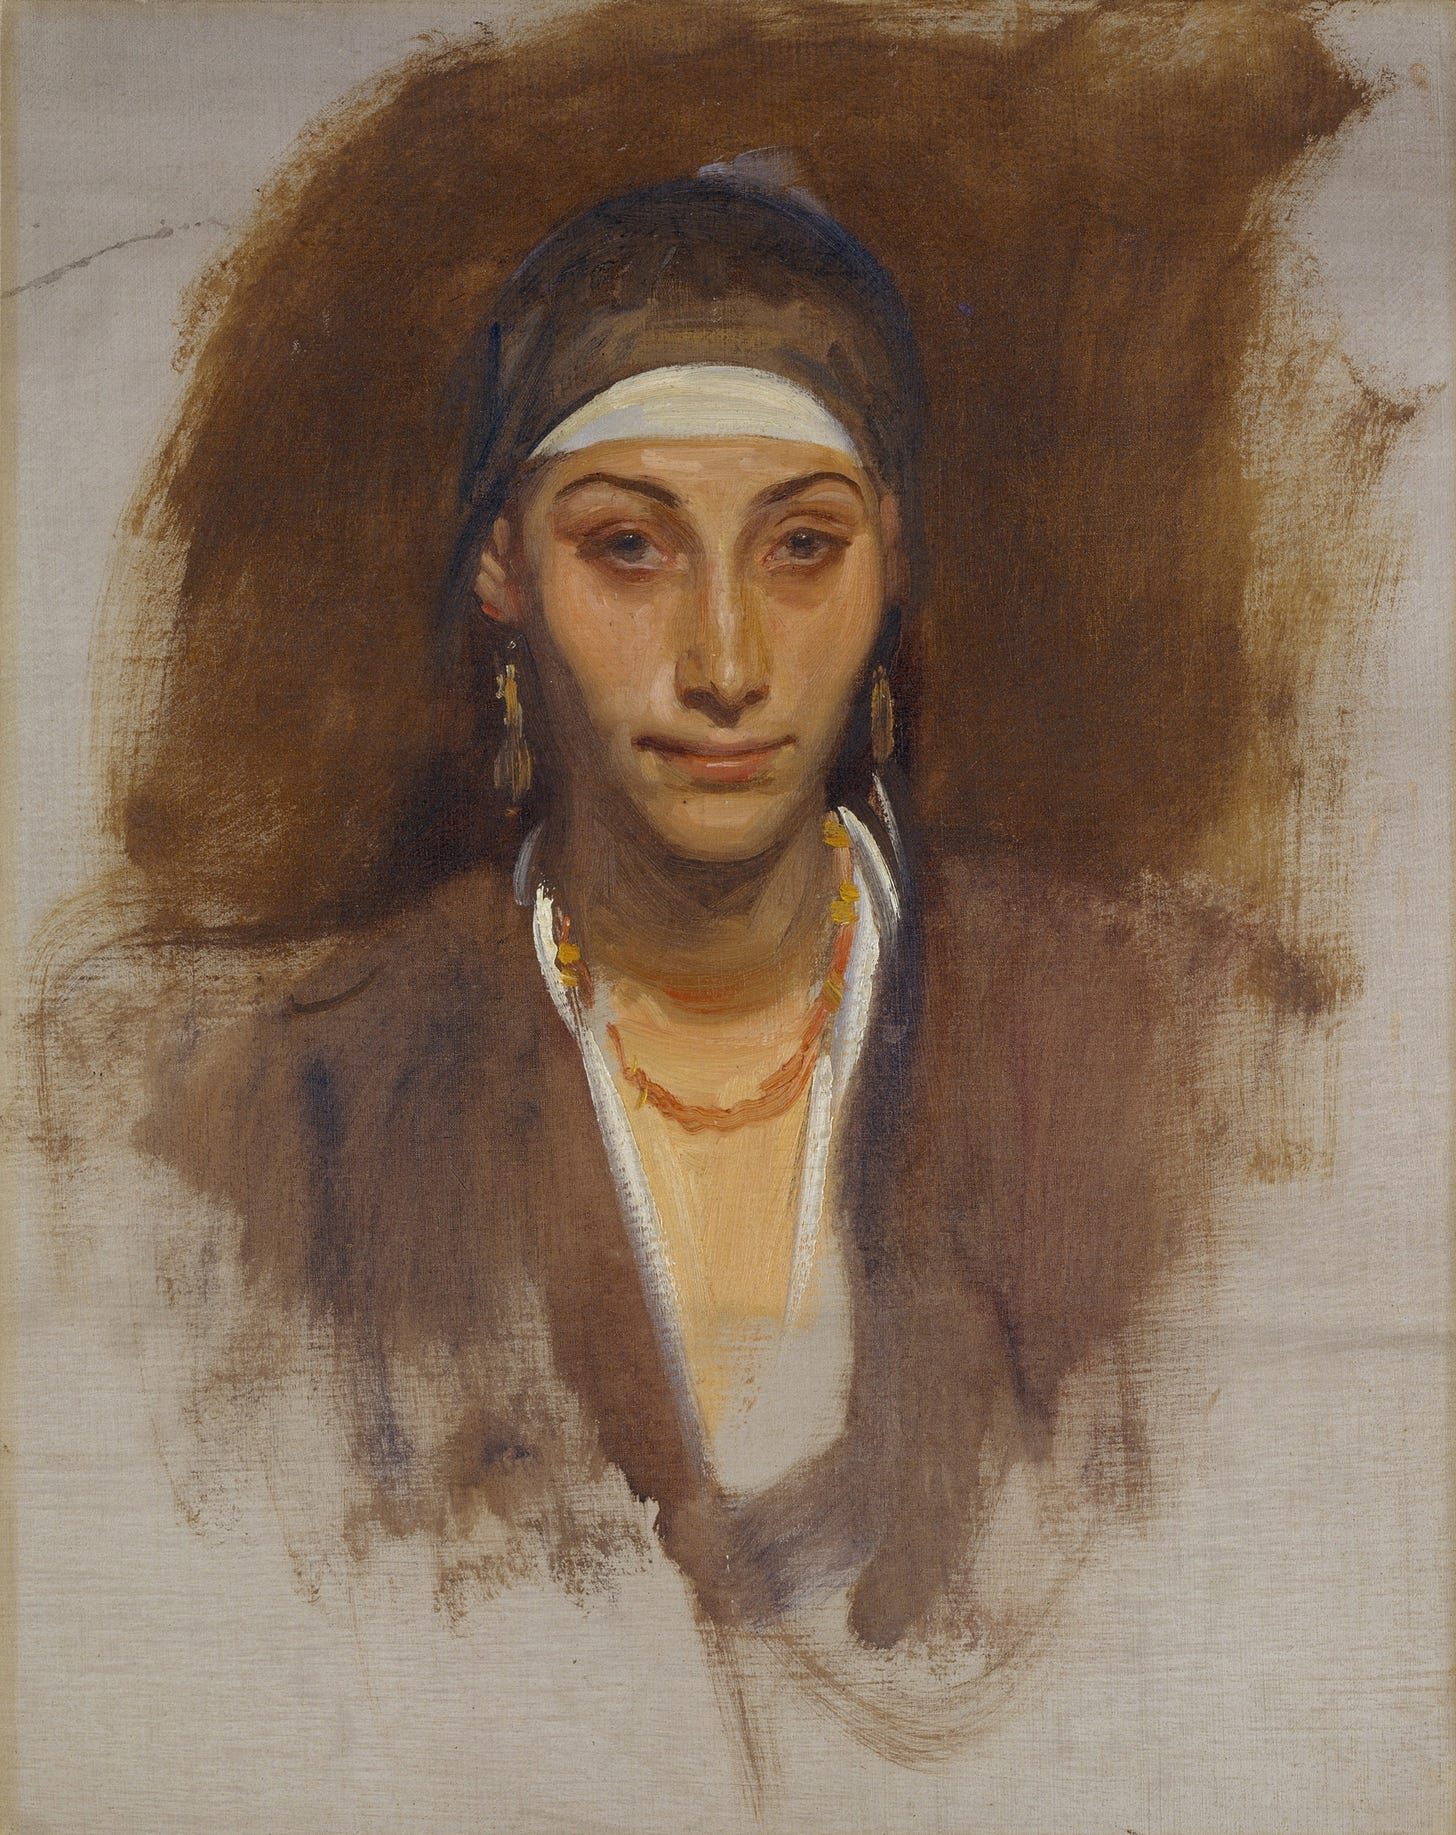 Egyptian Woman with Earrings (between 1890 and 1891)